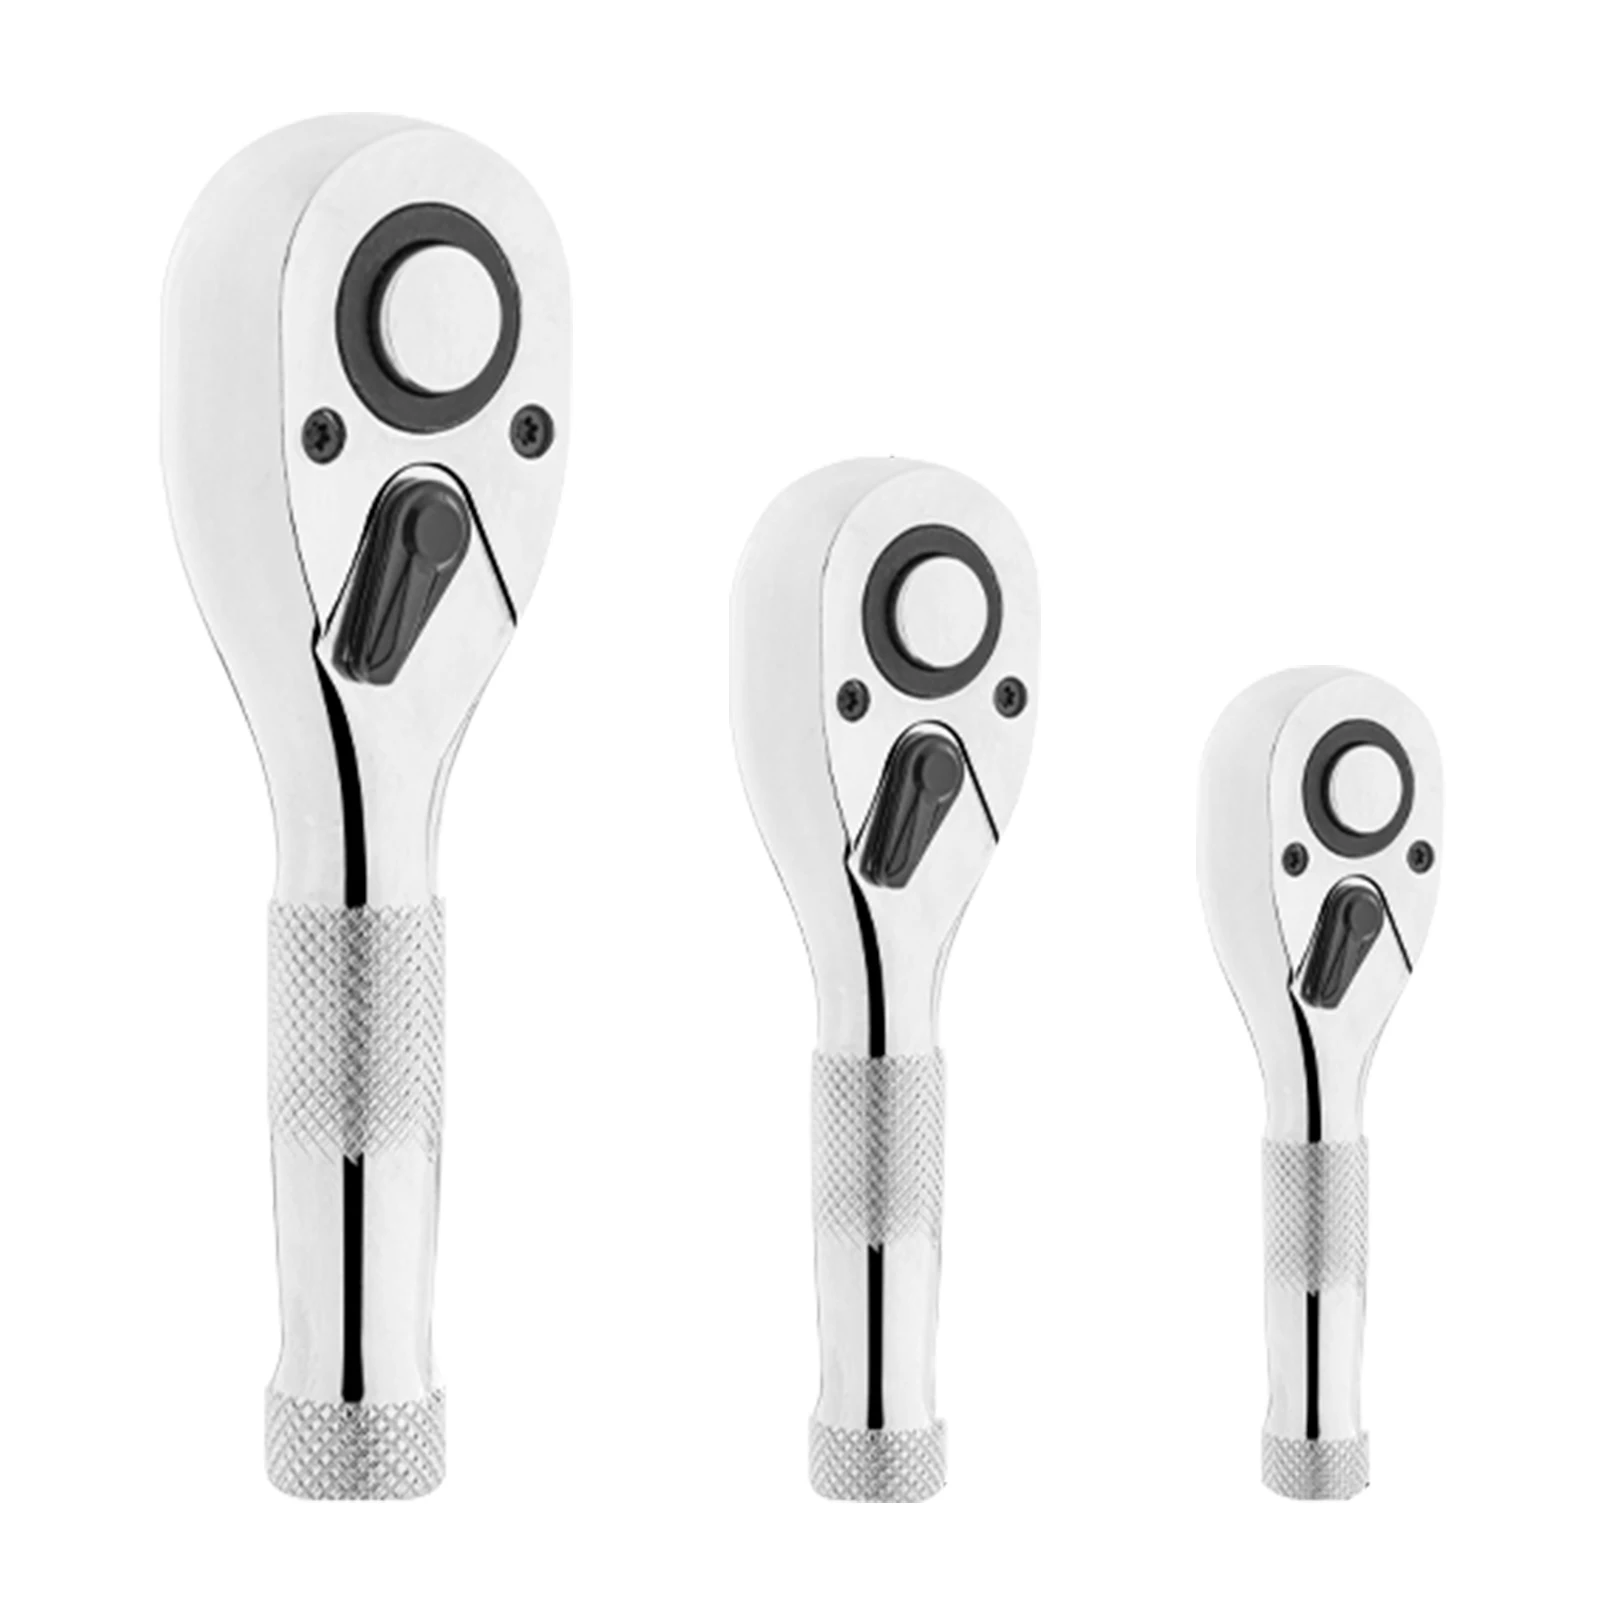 

3pcs Ratchet Wrench Chrome Vanadium Steel 72 Tooth 1/4inch 3/8inch 1/2inch Drive Quick-Release Head Professional Car Repair Mini